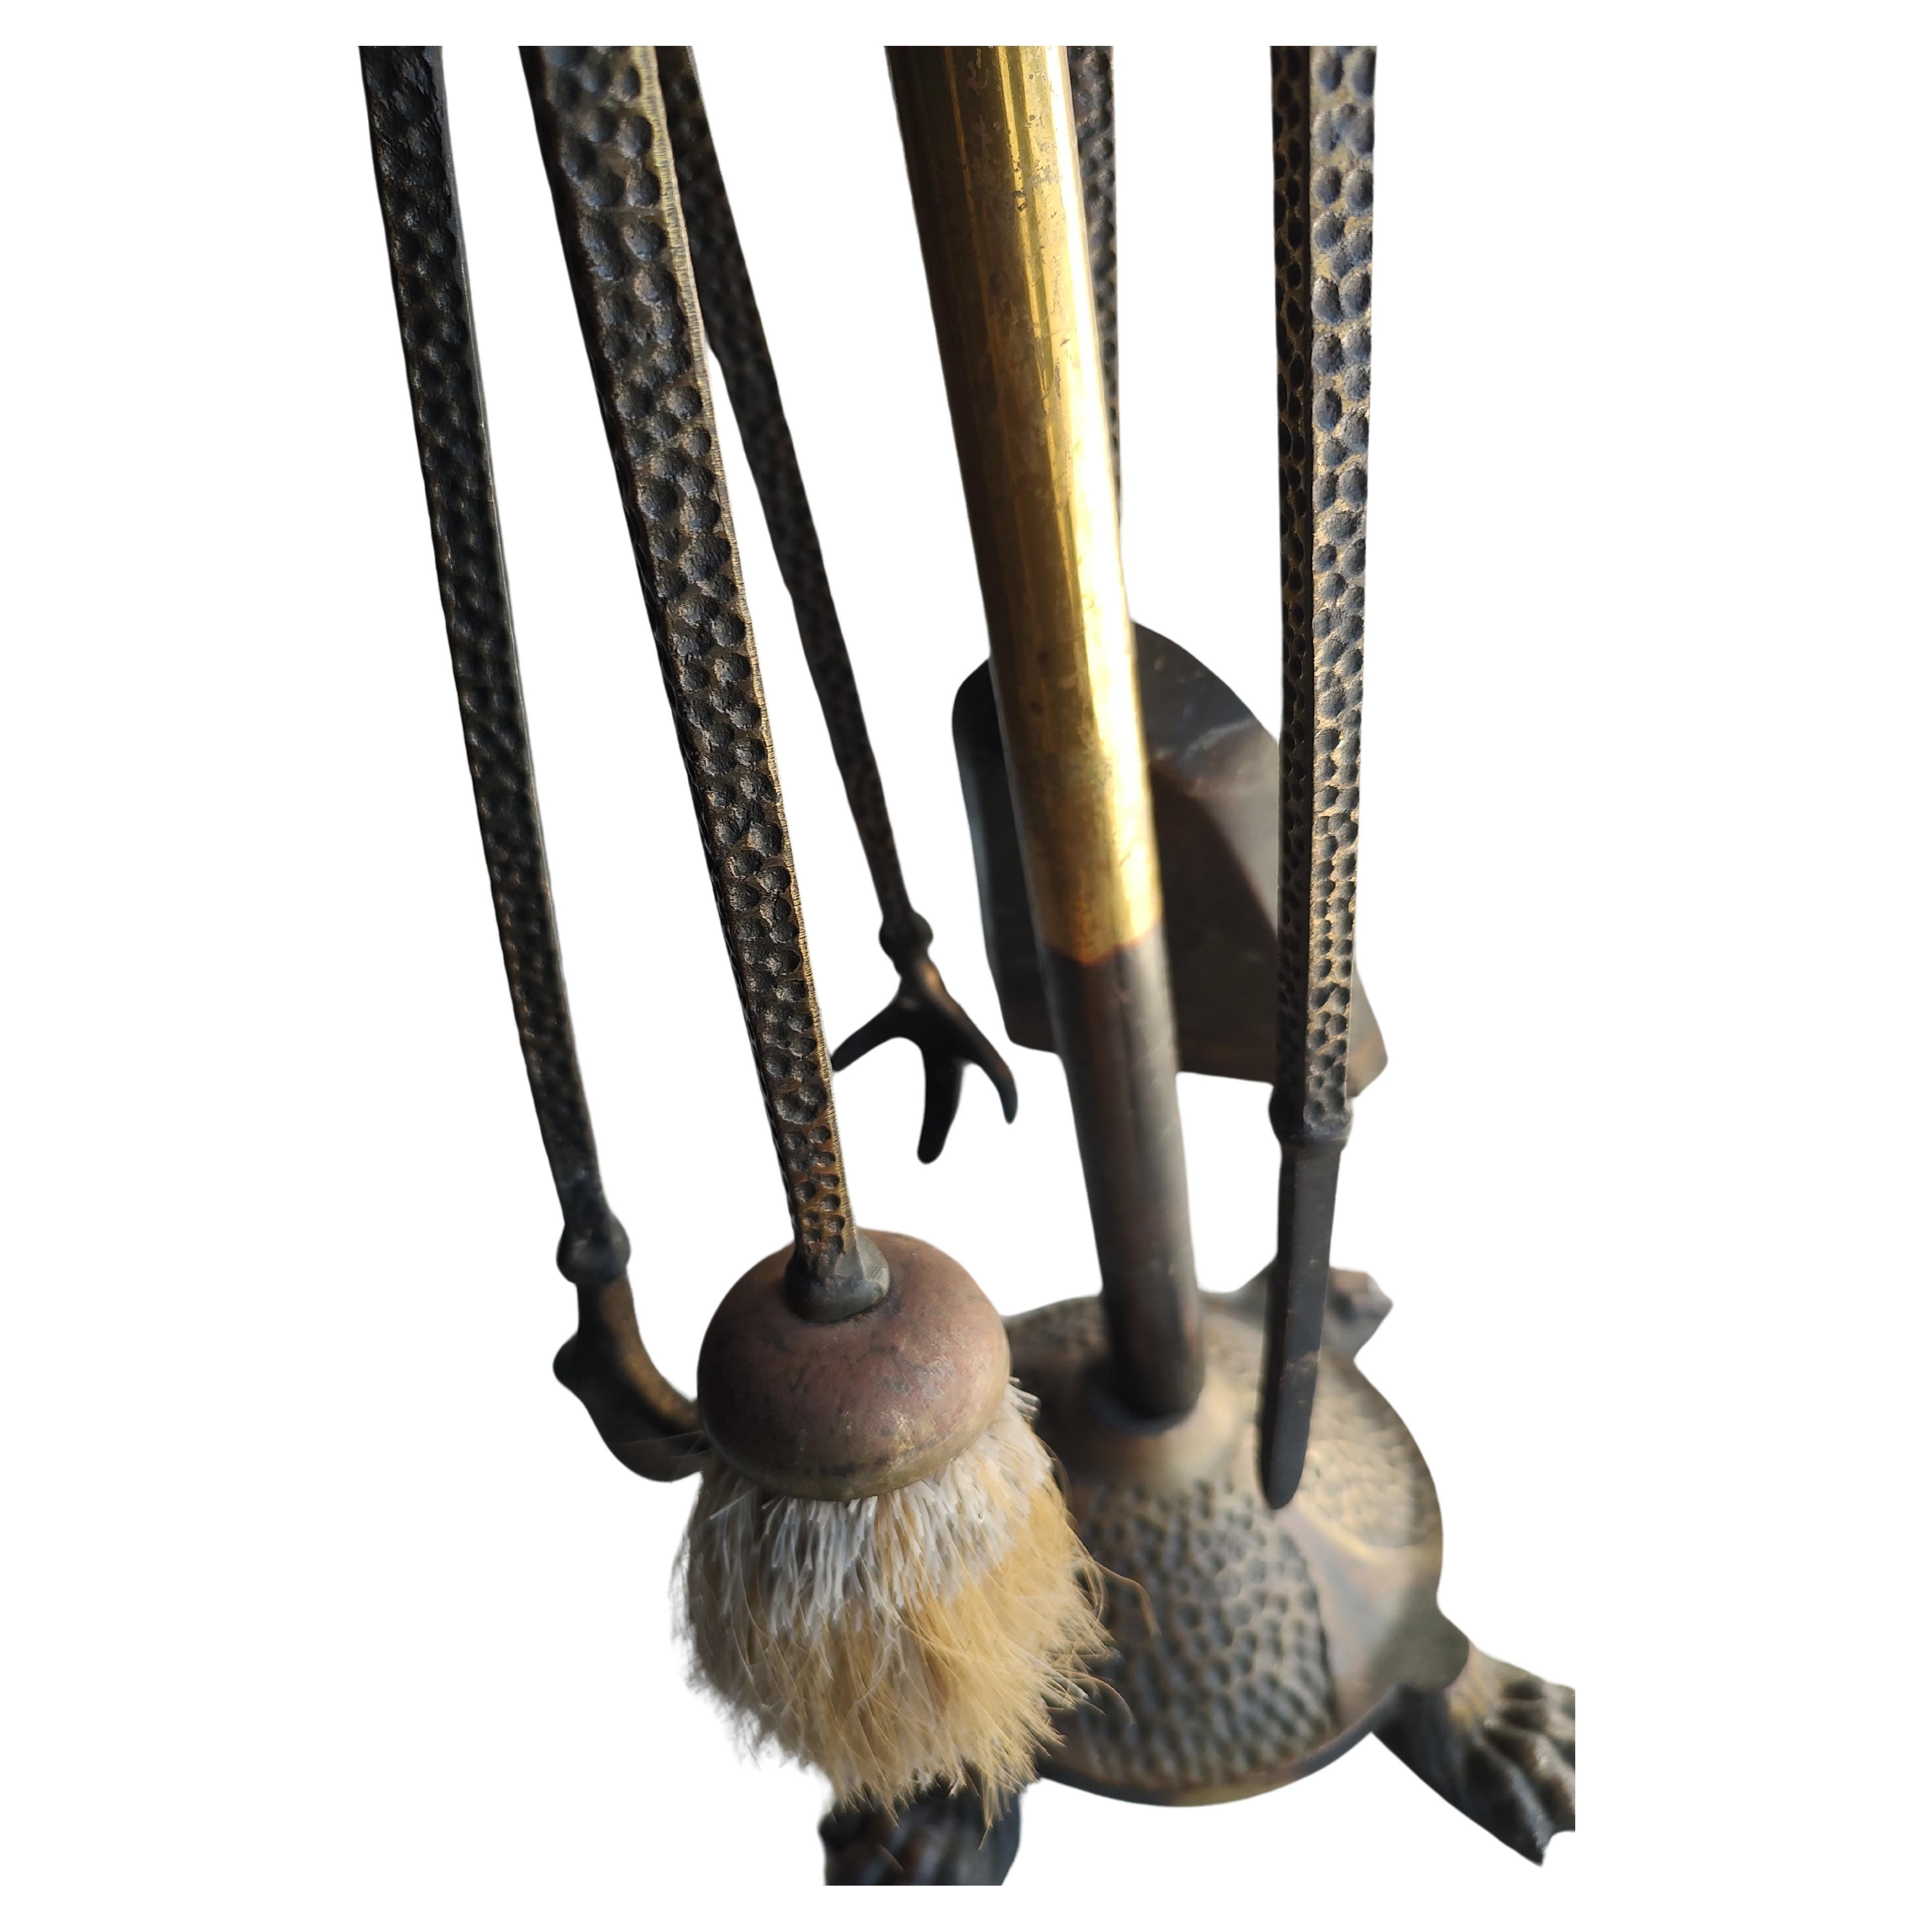 Fabulous set of 4 tools with the holder. Hammered brass with claw feet and duck heads atop each tool & the holder. Shovel, brush, poker and the tongs with the holder all in excellent antique condition with no issues.